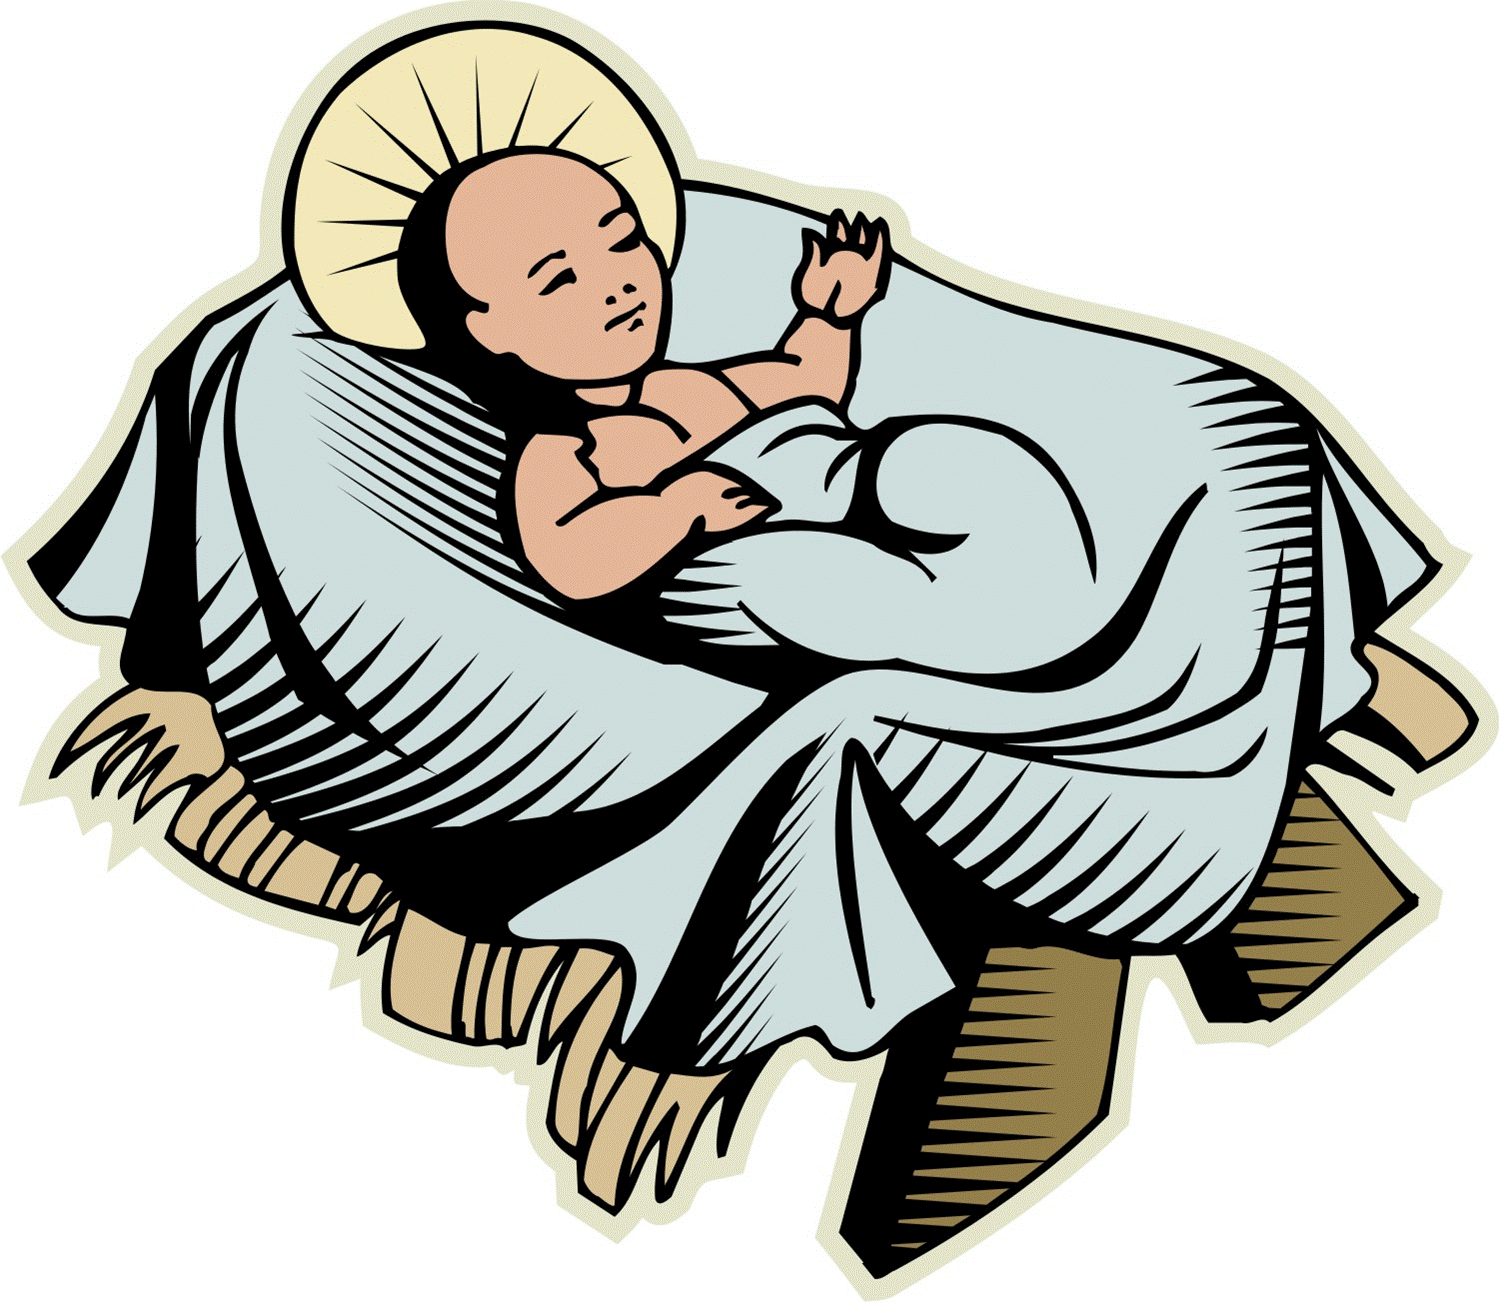 free clipart images of baby jesus - photo #2